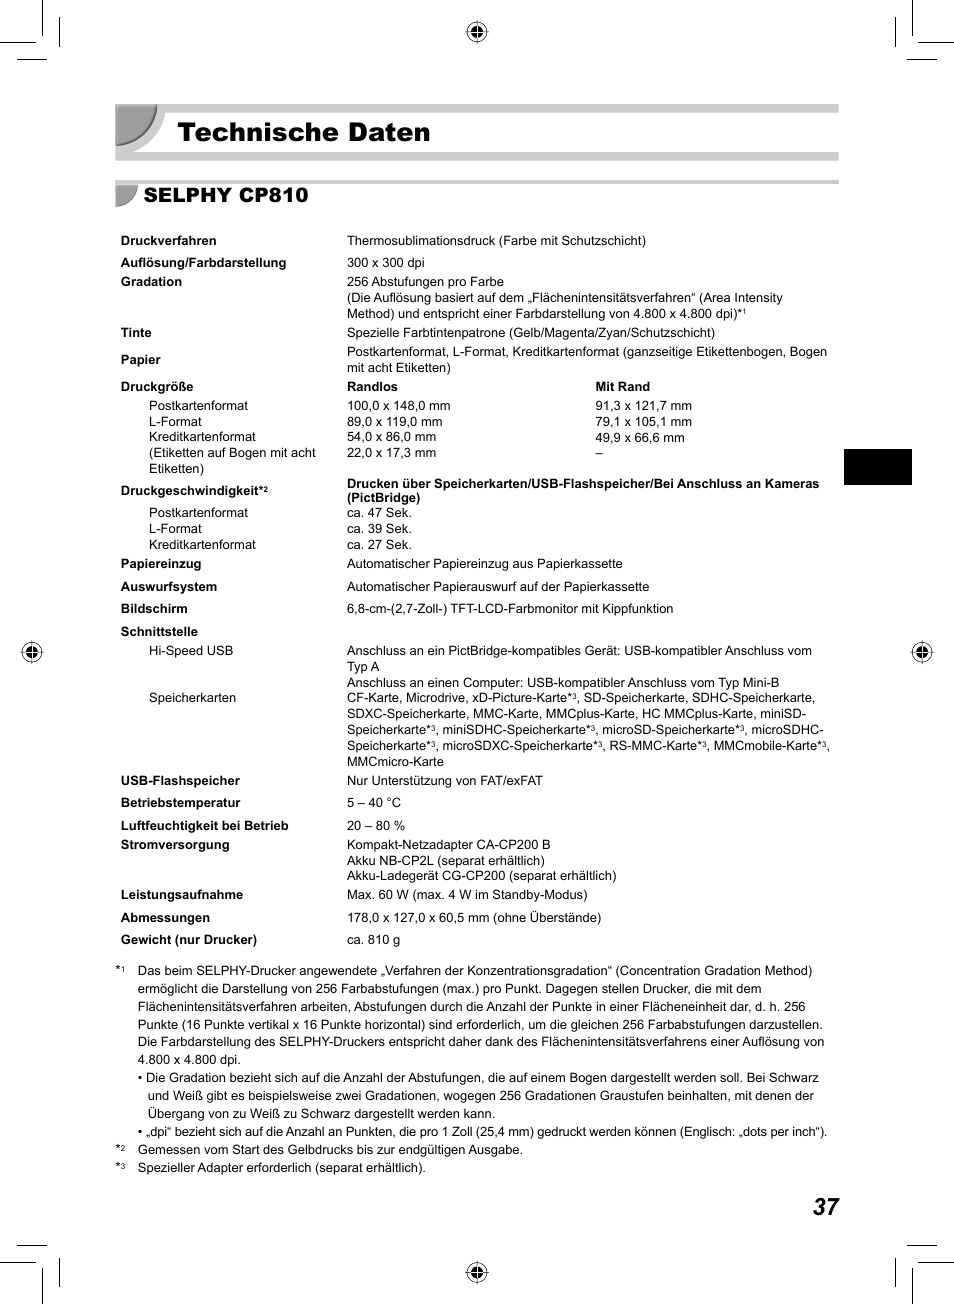 Technische daten, Selphy cp810 | Canon SELPHY CP810 User Manual | Page